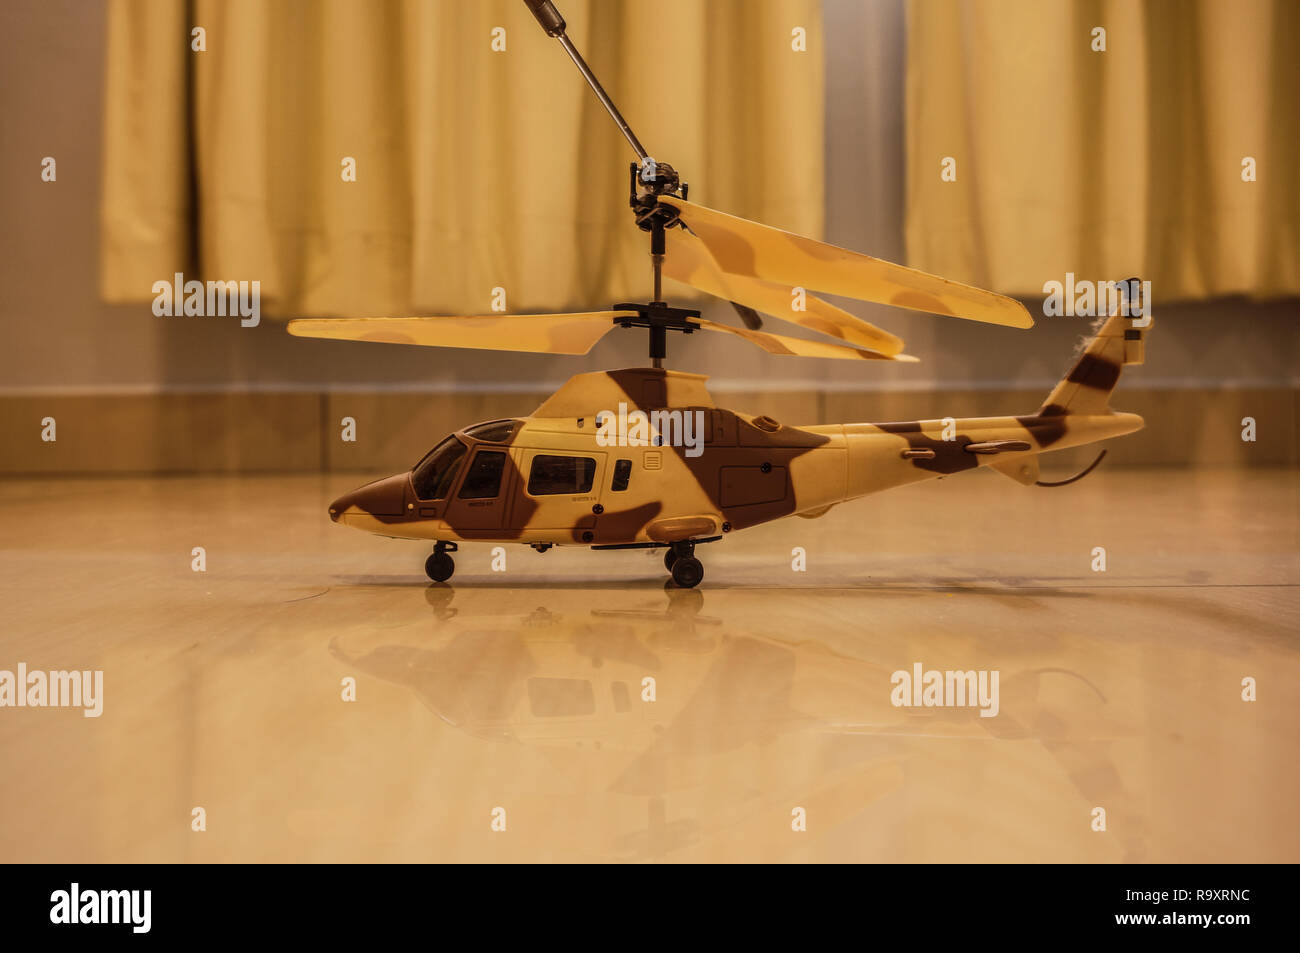 Still live helicopter on floor Stock Photo